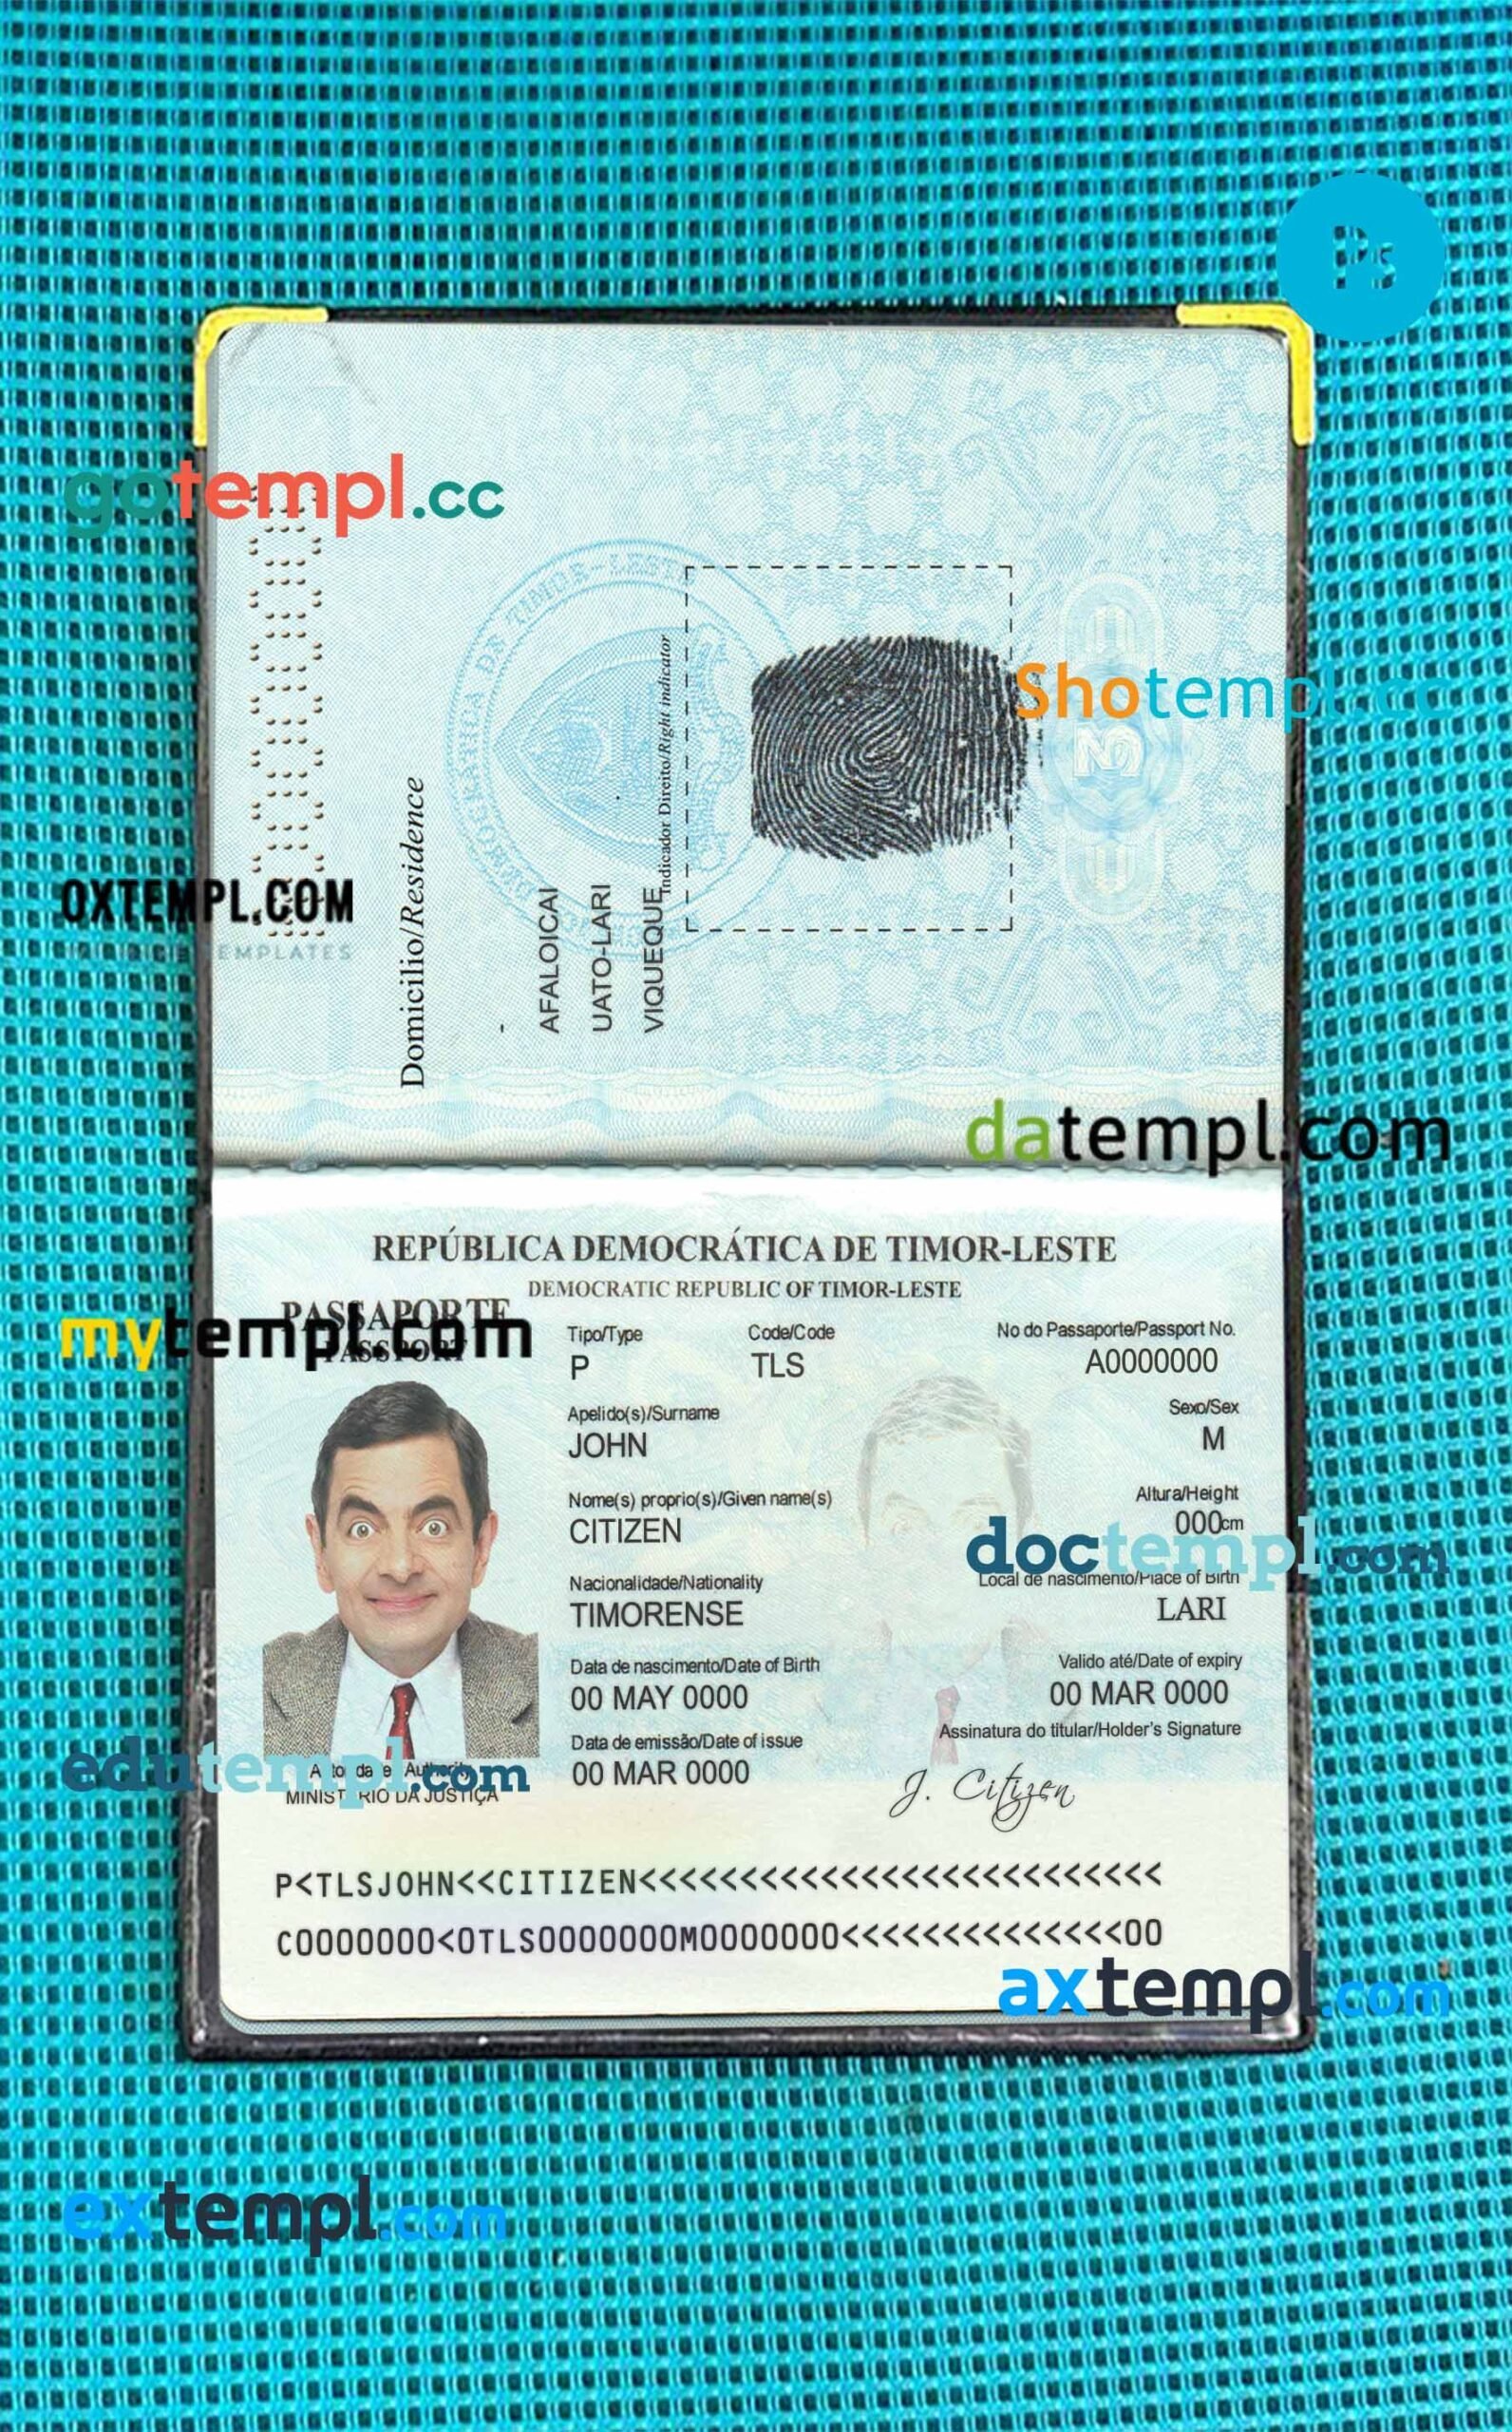 France passport psd files, editable scan and snapshot sample, 2 in 1